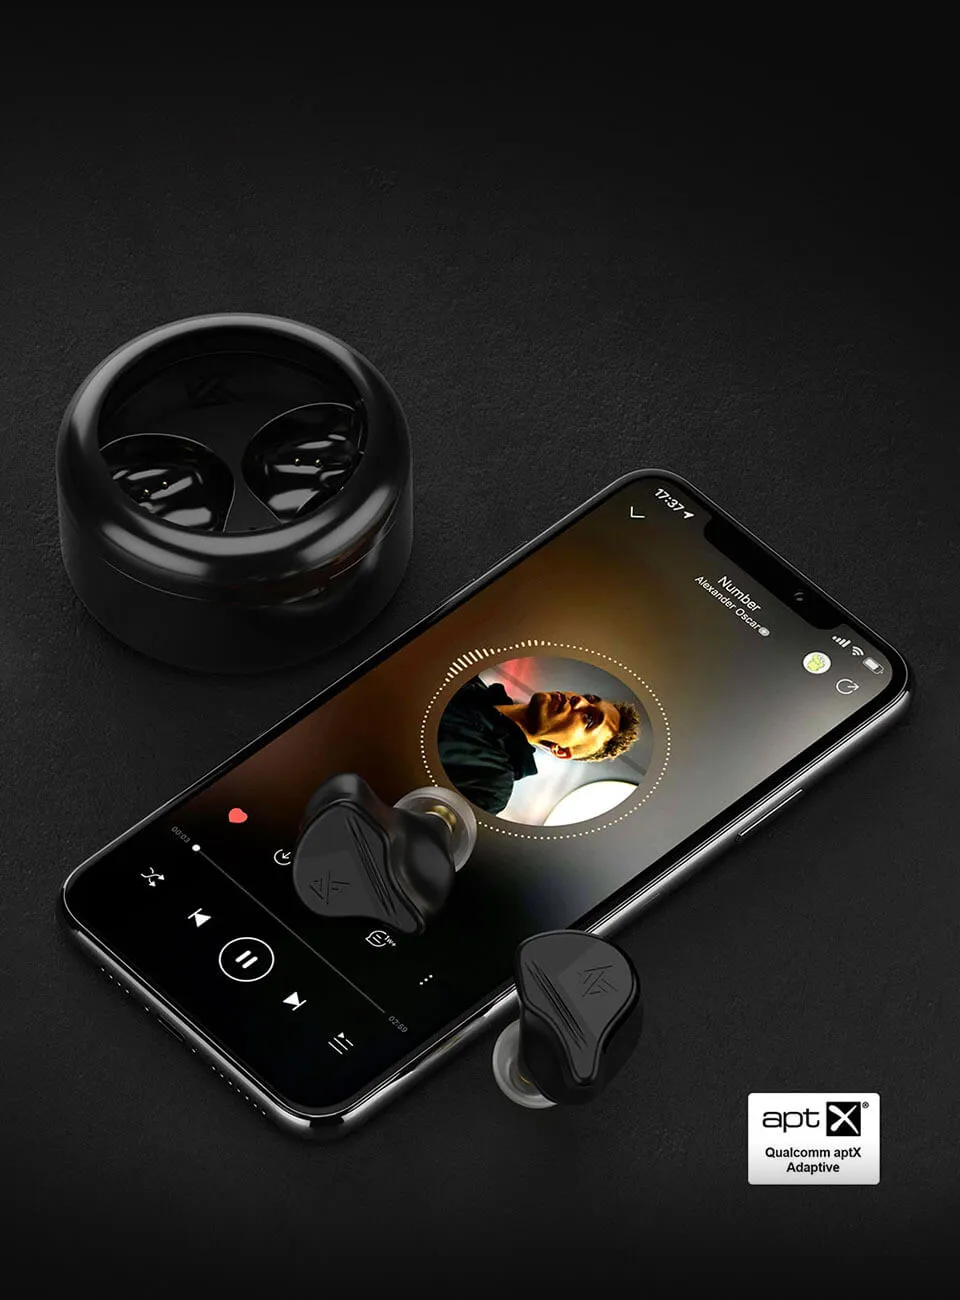 KZ VXS earbuds and charger case next to smartphone